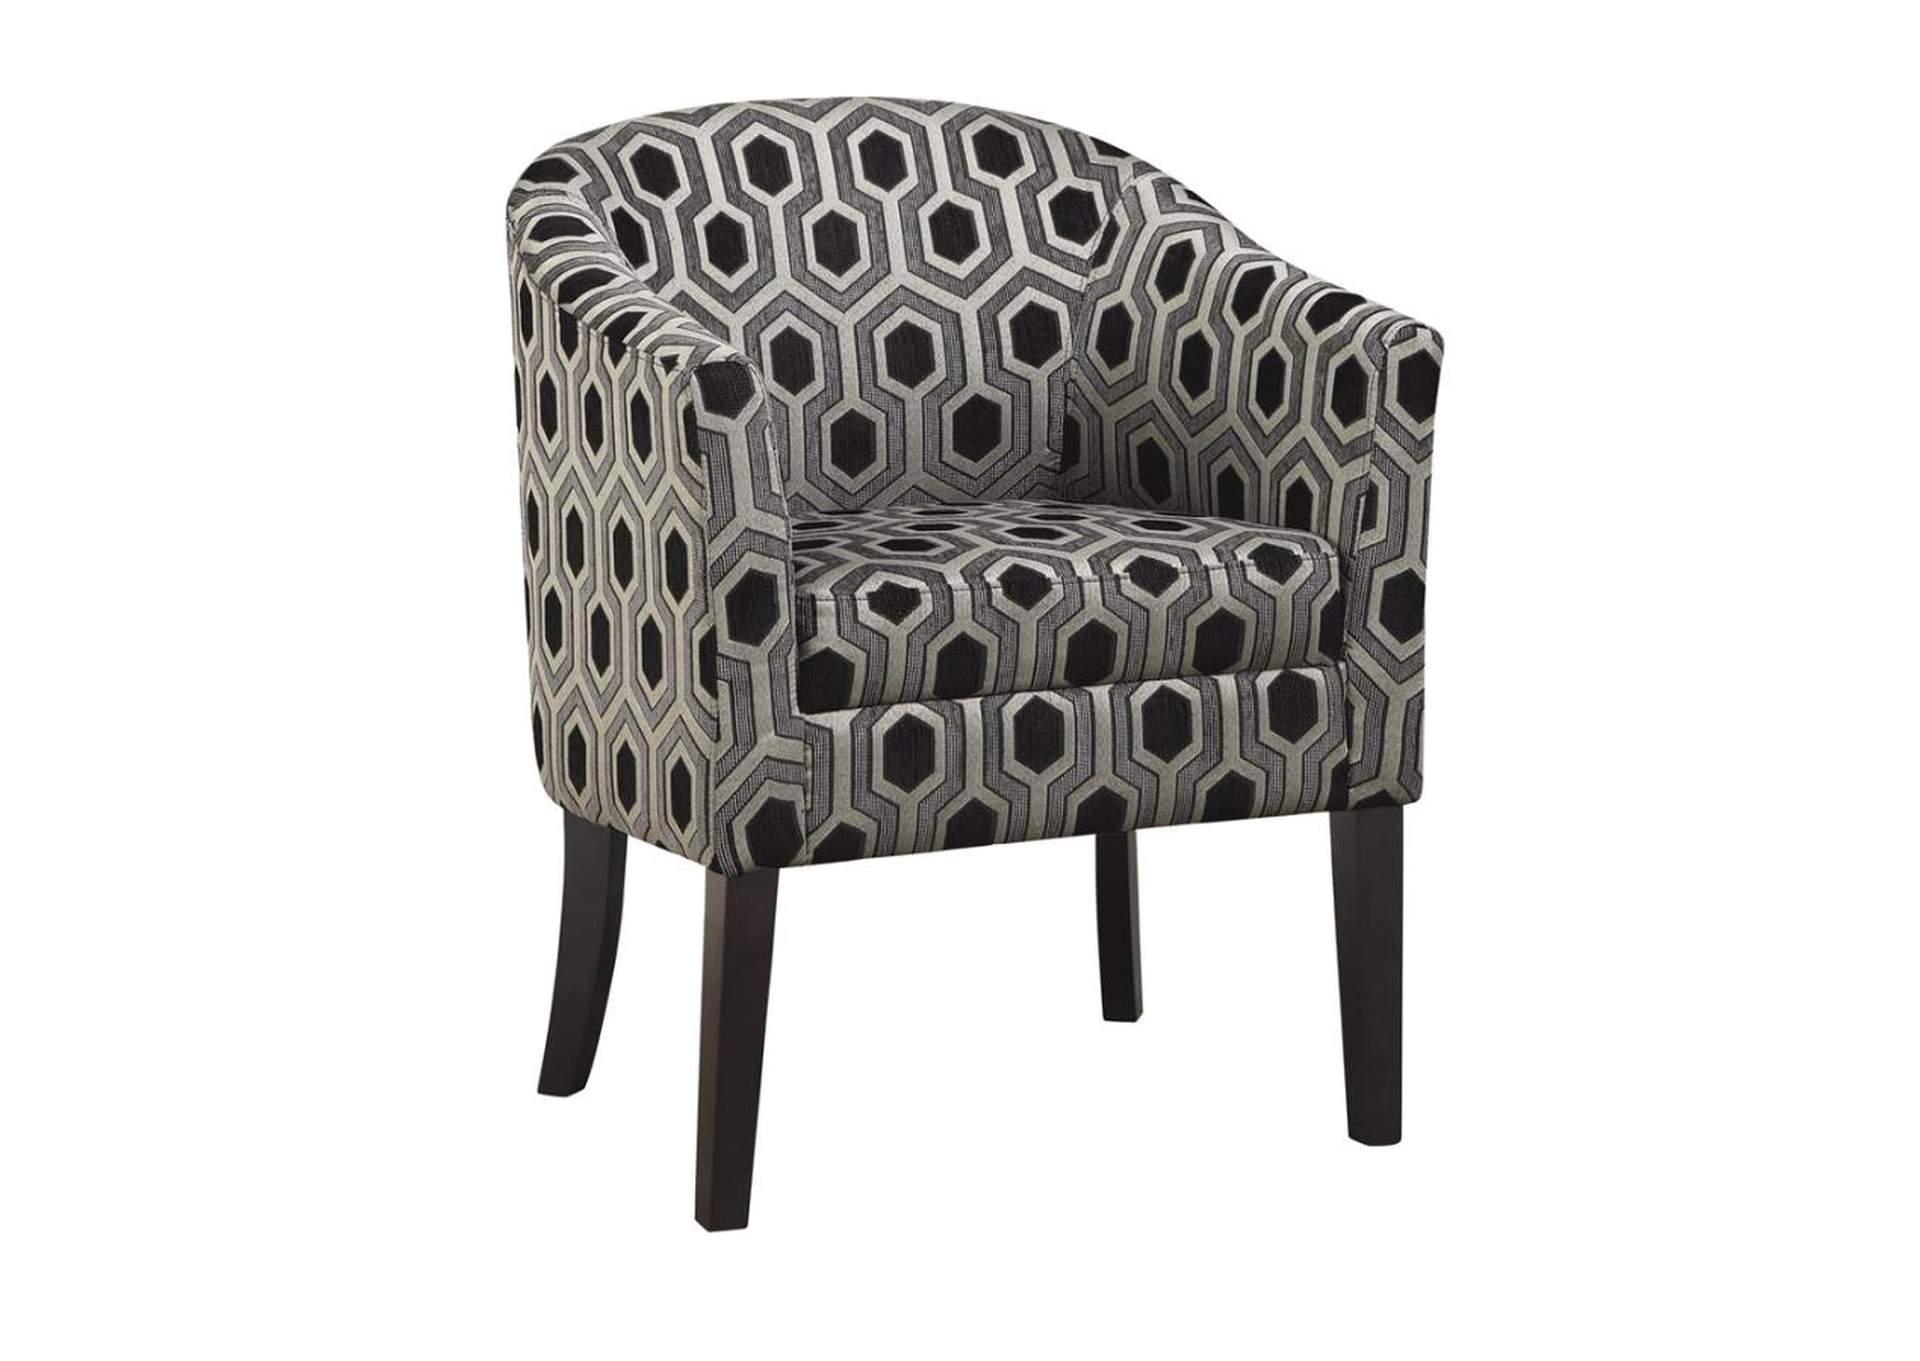 Hexagon Patterned Accent Chair Grey and Black,Coaster Furniture